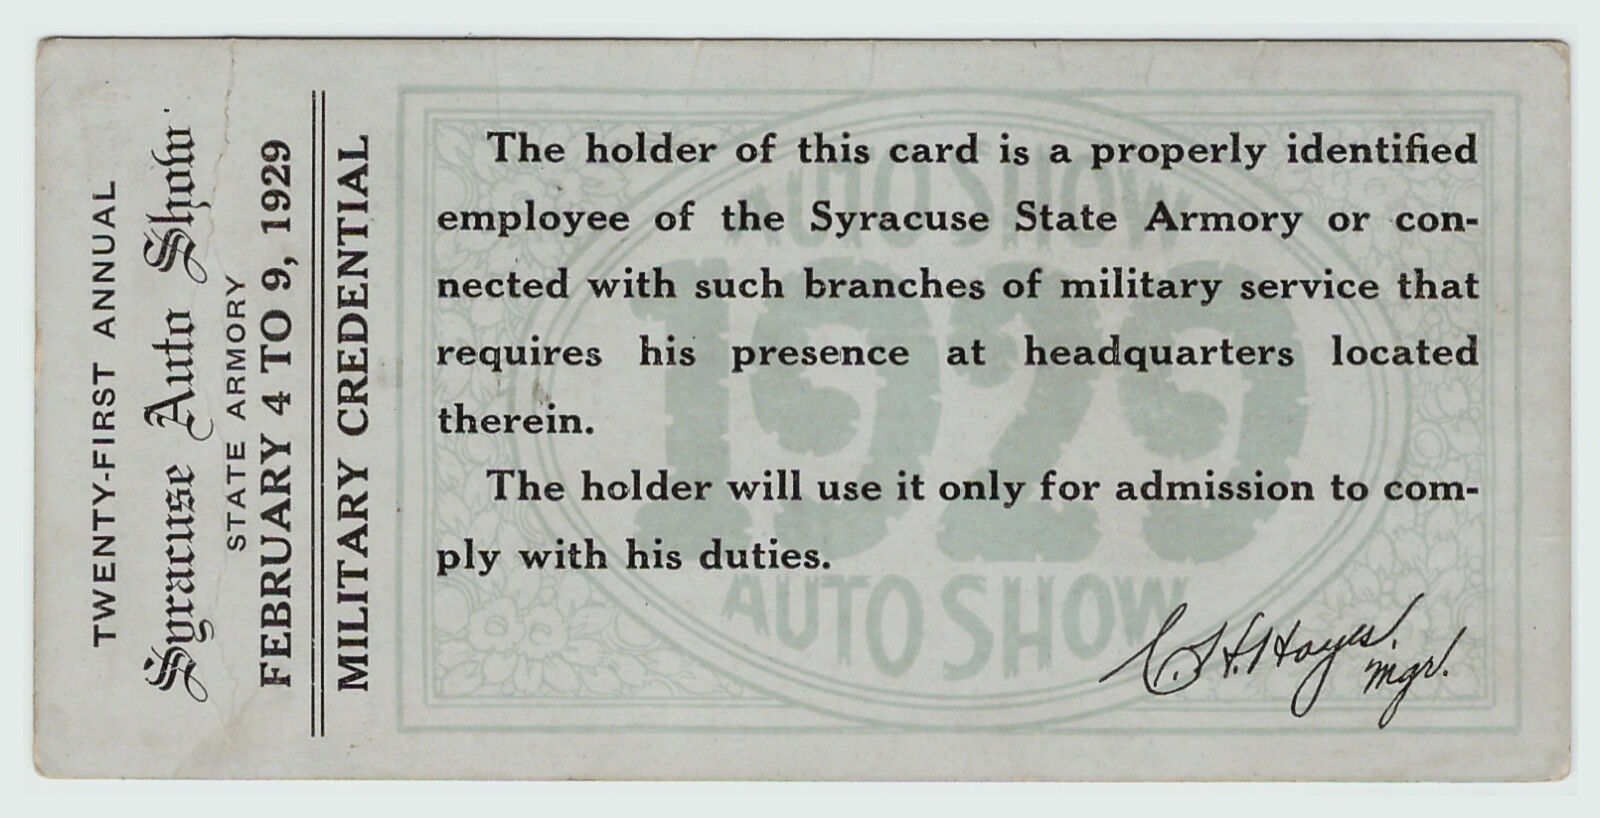 xRARE - 1929 Syracuse NY Auto Car Show Ticket - Military Credential 108th